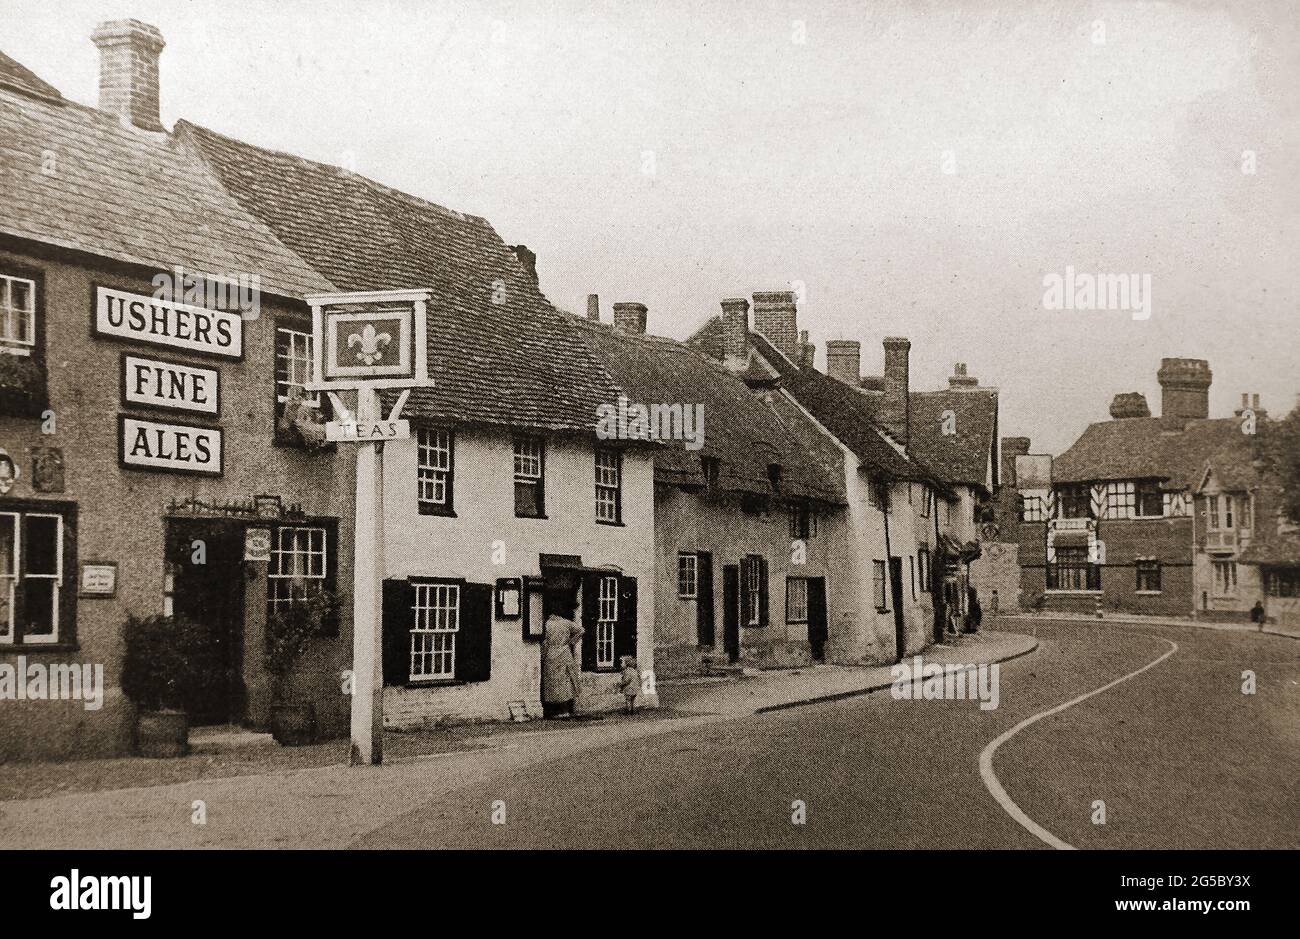 The Fleur de Lys,  ( An Ushers Brewery pub), Dorchester on Thames, Oxfordshire, UK circa 1930's /1940's with its inn sign and nearby thatched roof houses. Stock Photo